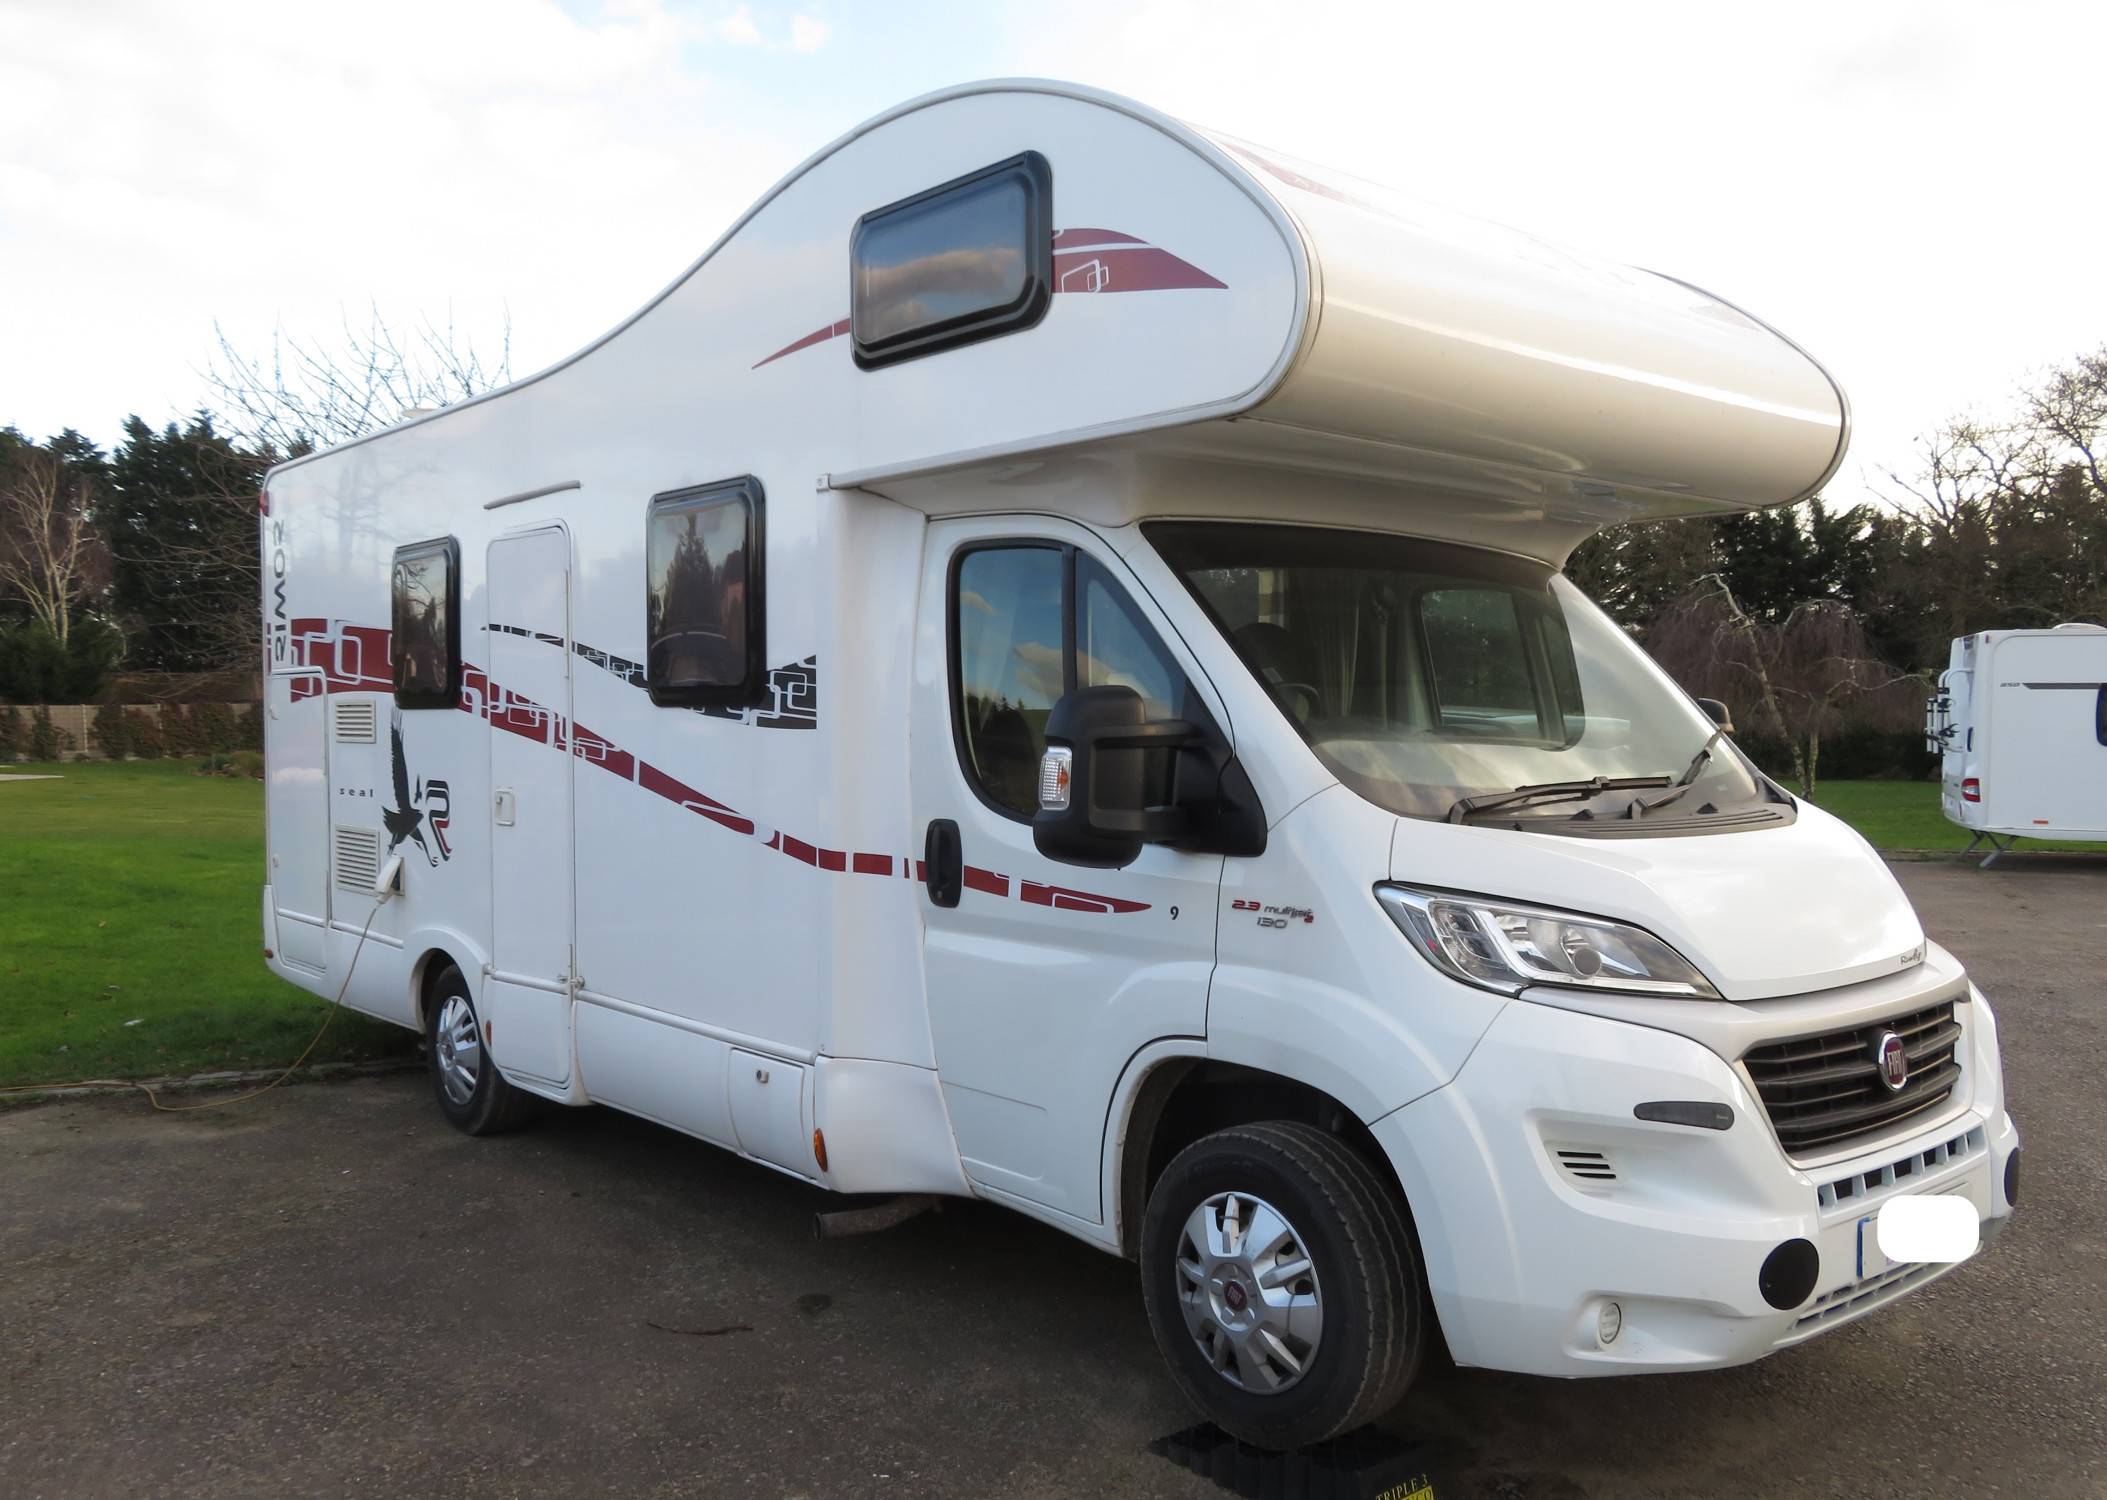 A Rimor Motorhome called Seal and for hire in High Wycombe, England